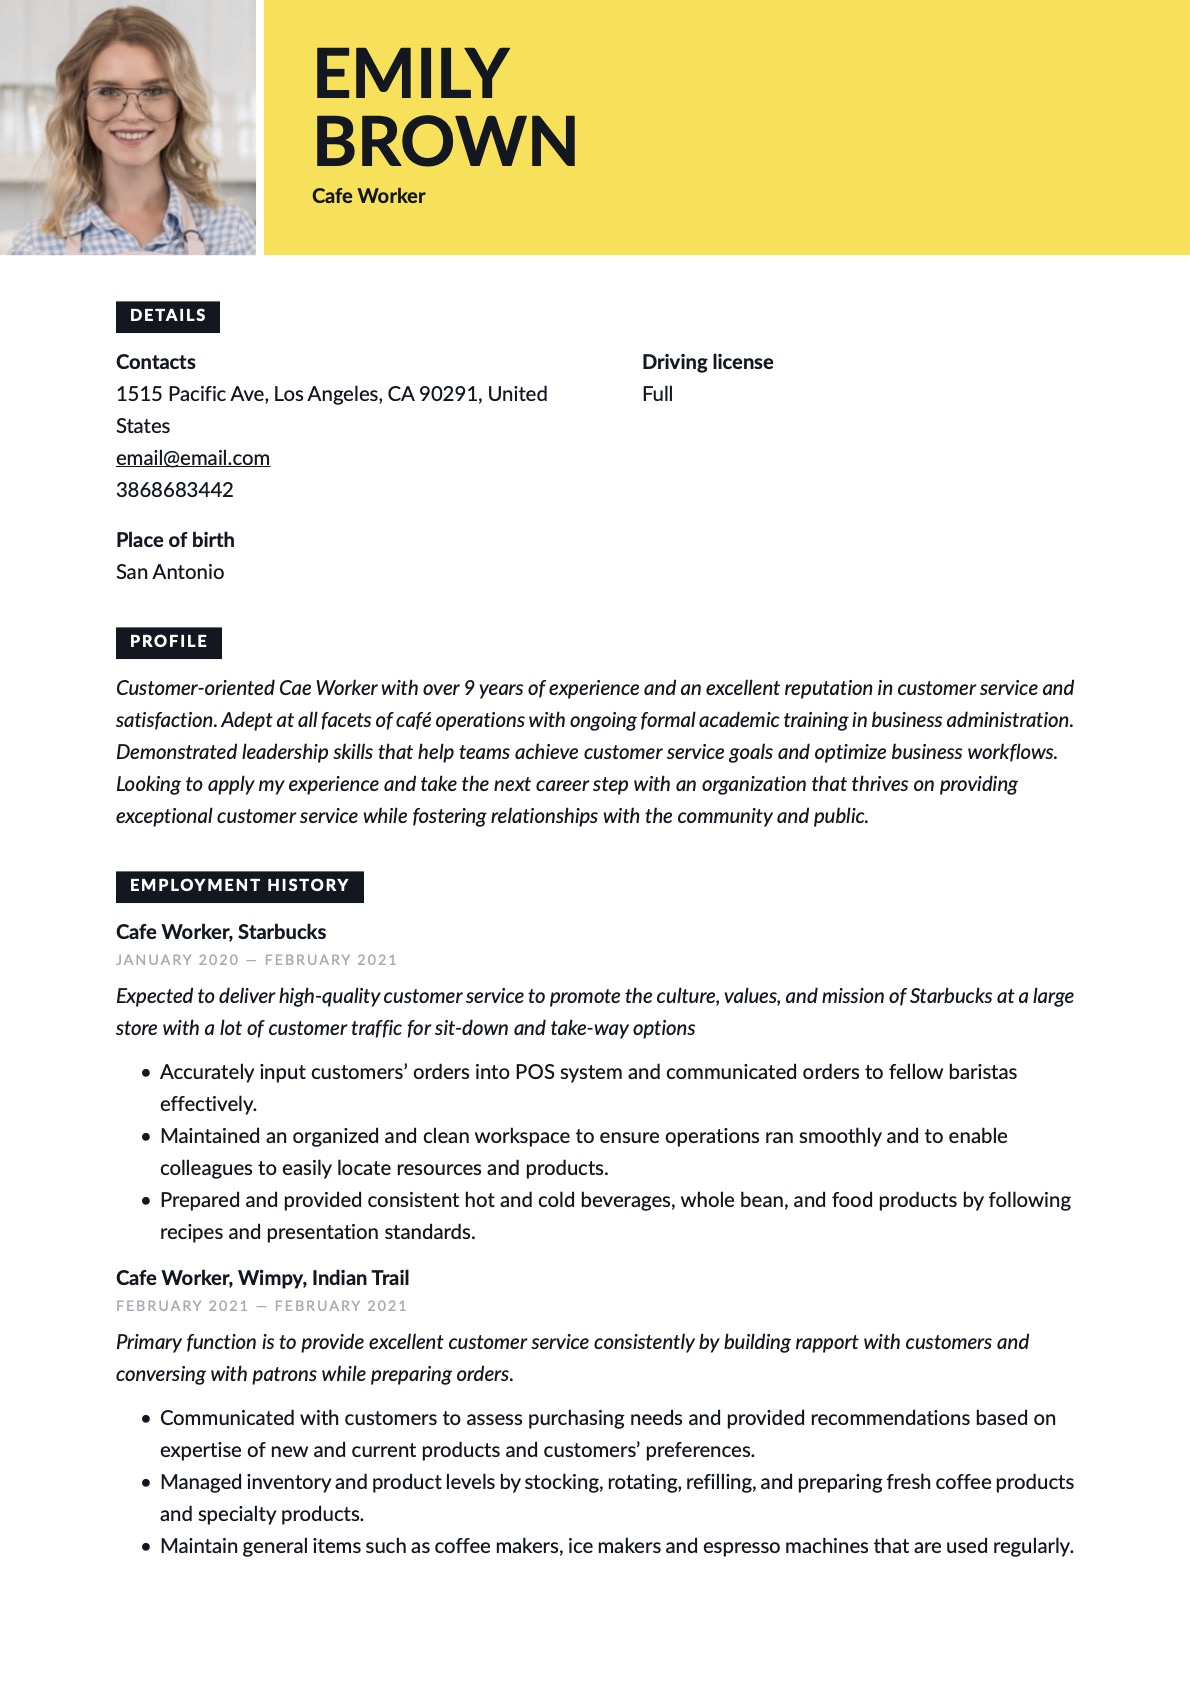 Example Resume Cafe Worker-9